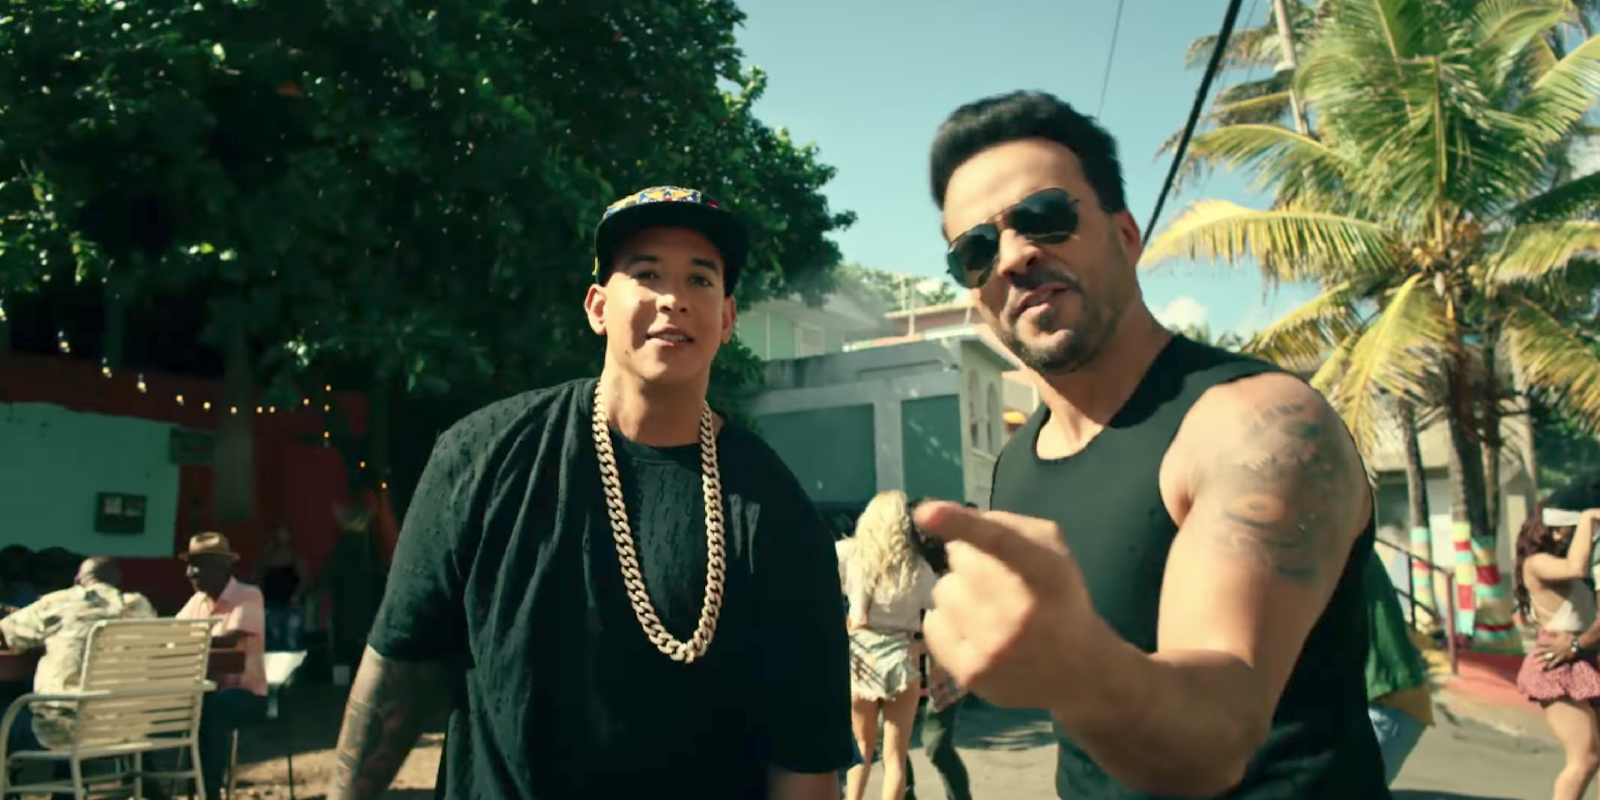 A still from the music video for Despacito by Luis Fonsi featuring Daddy Yankee